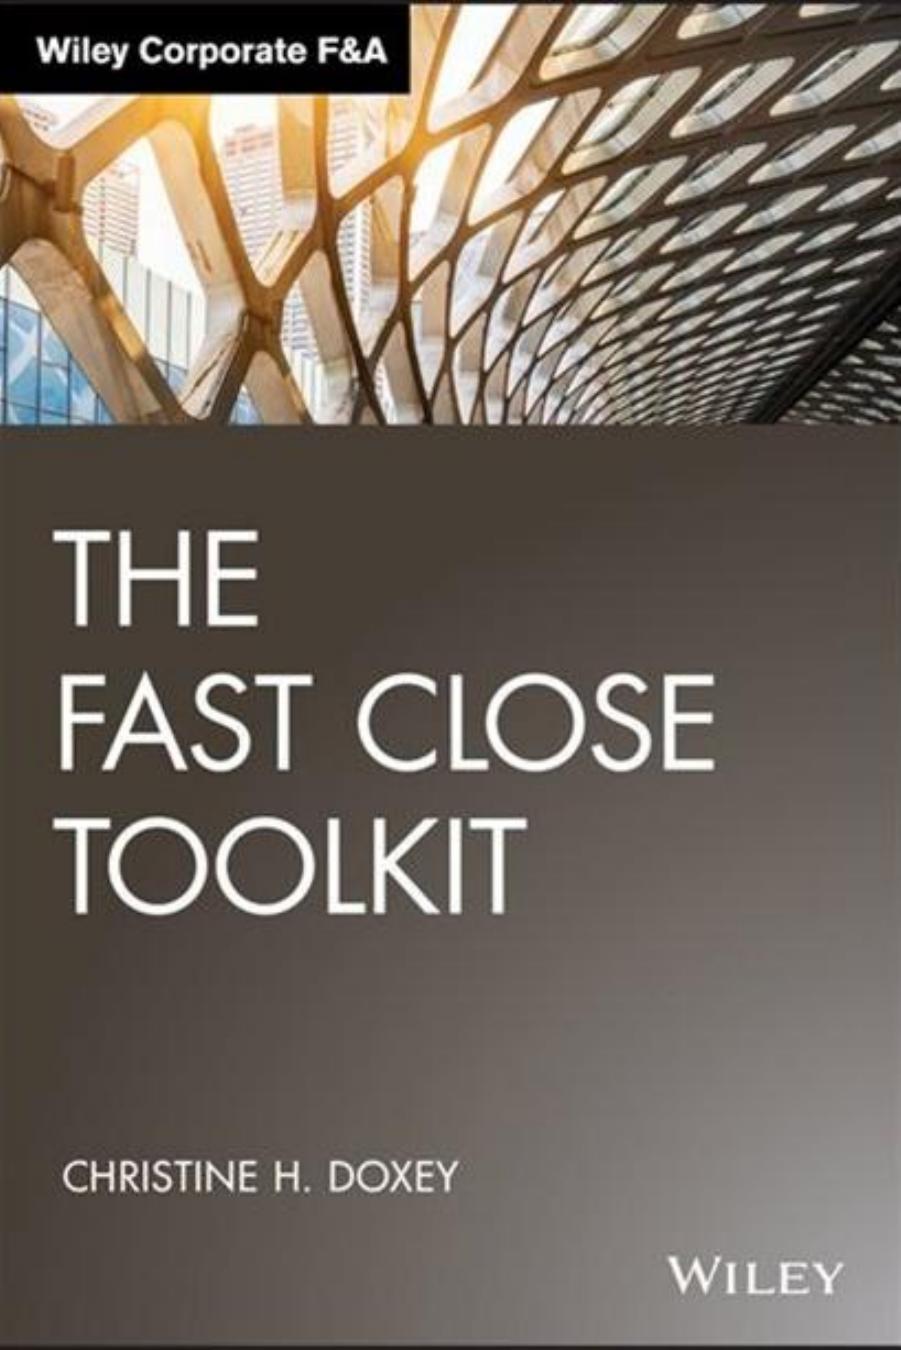 The Fast Close Toolkit by Christine H. Doxey